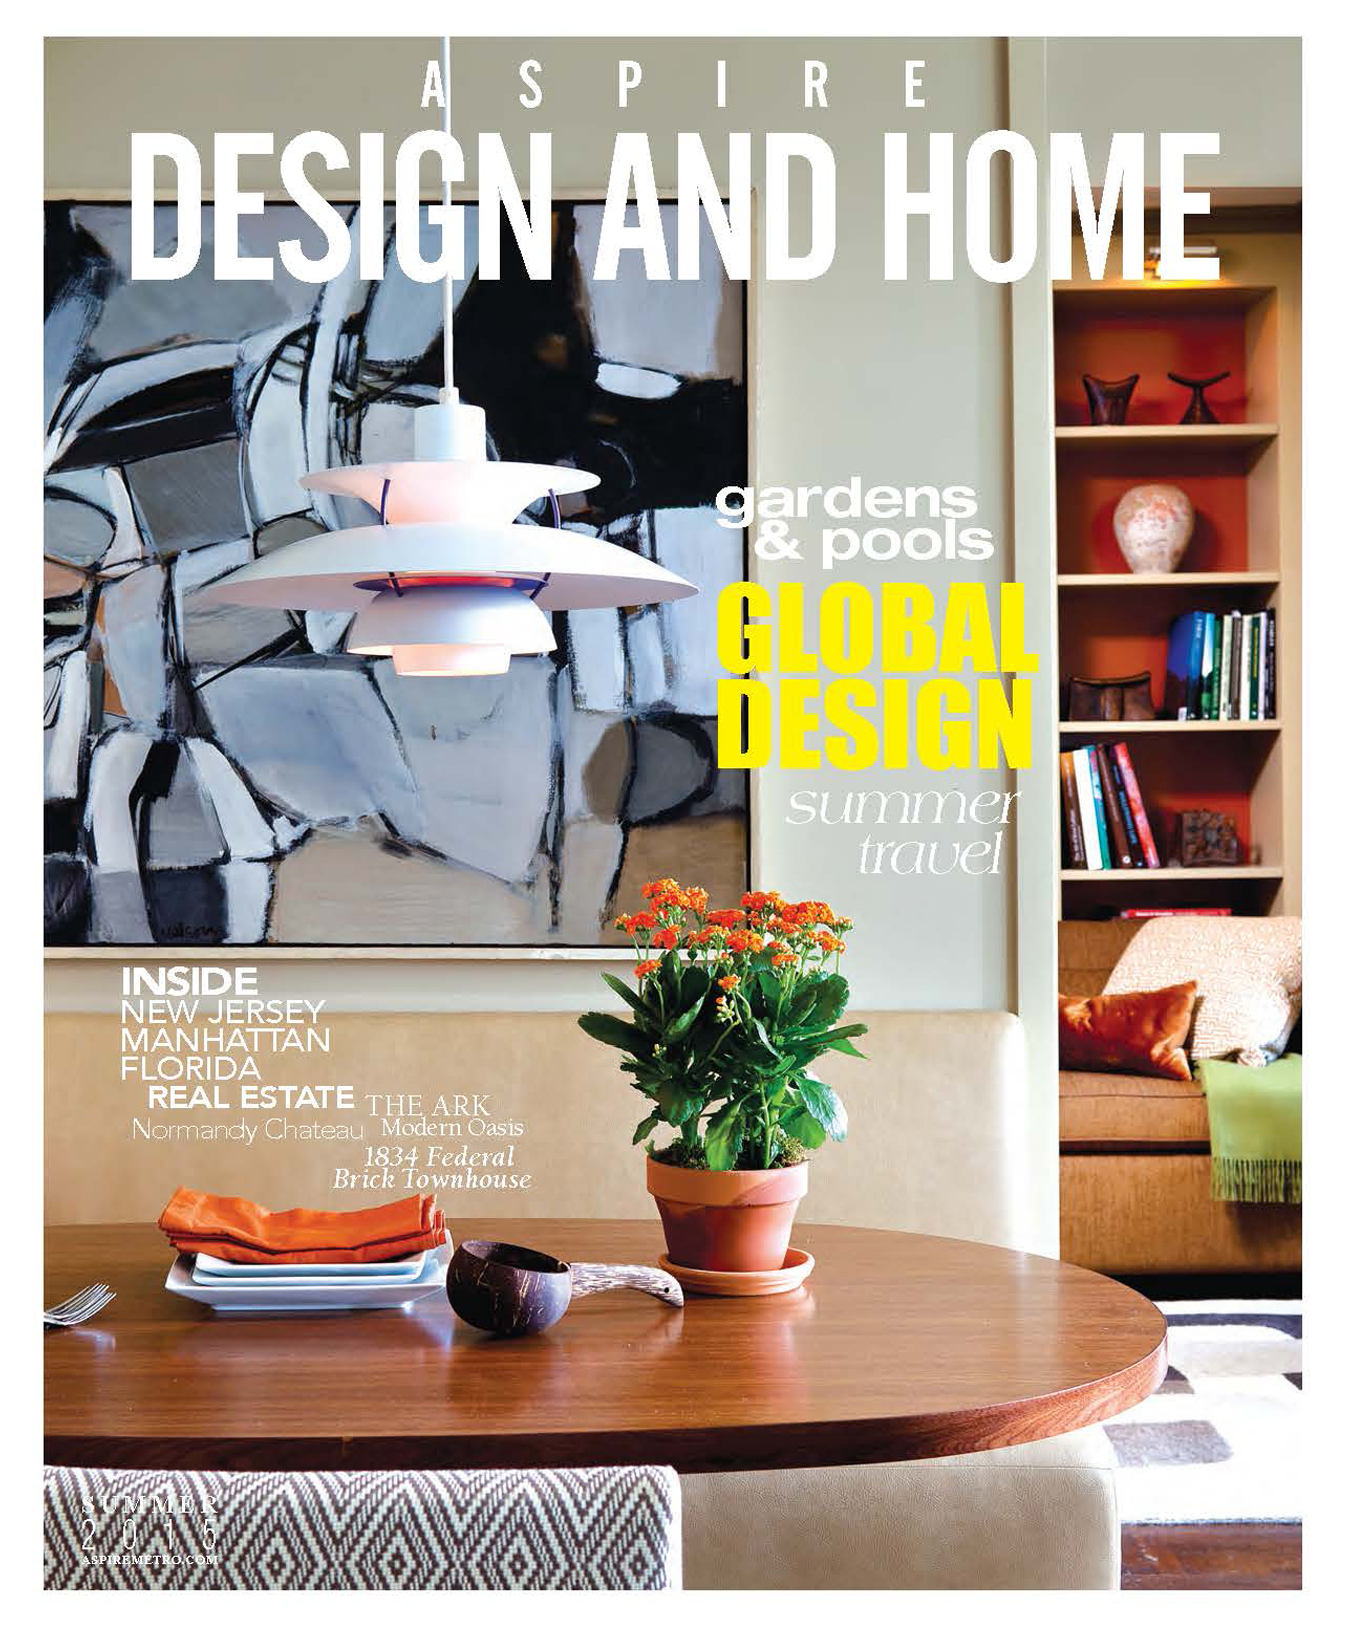 Aspire Metro Magazine “Interior Design Projects With An International Accent”